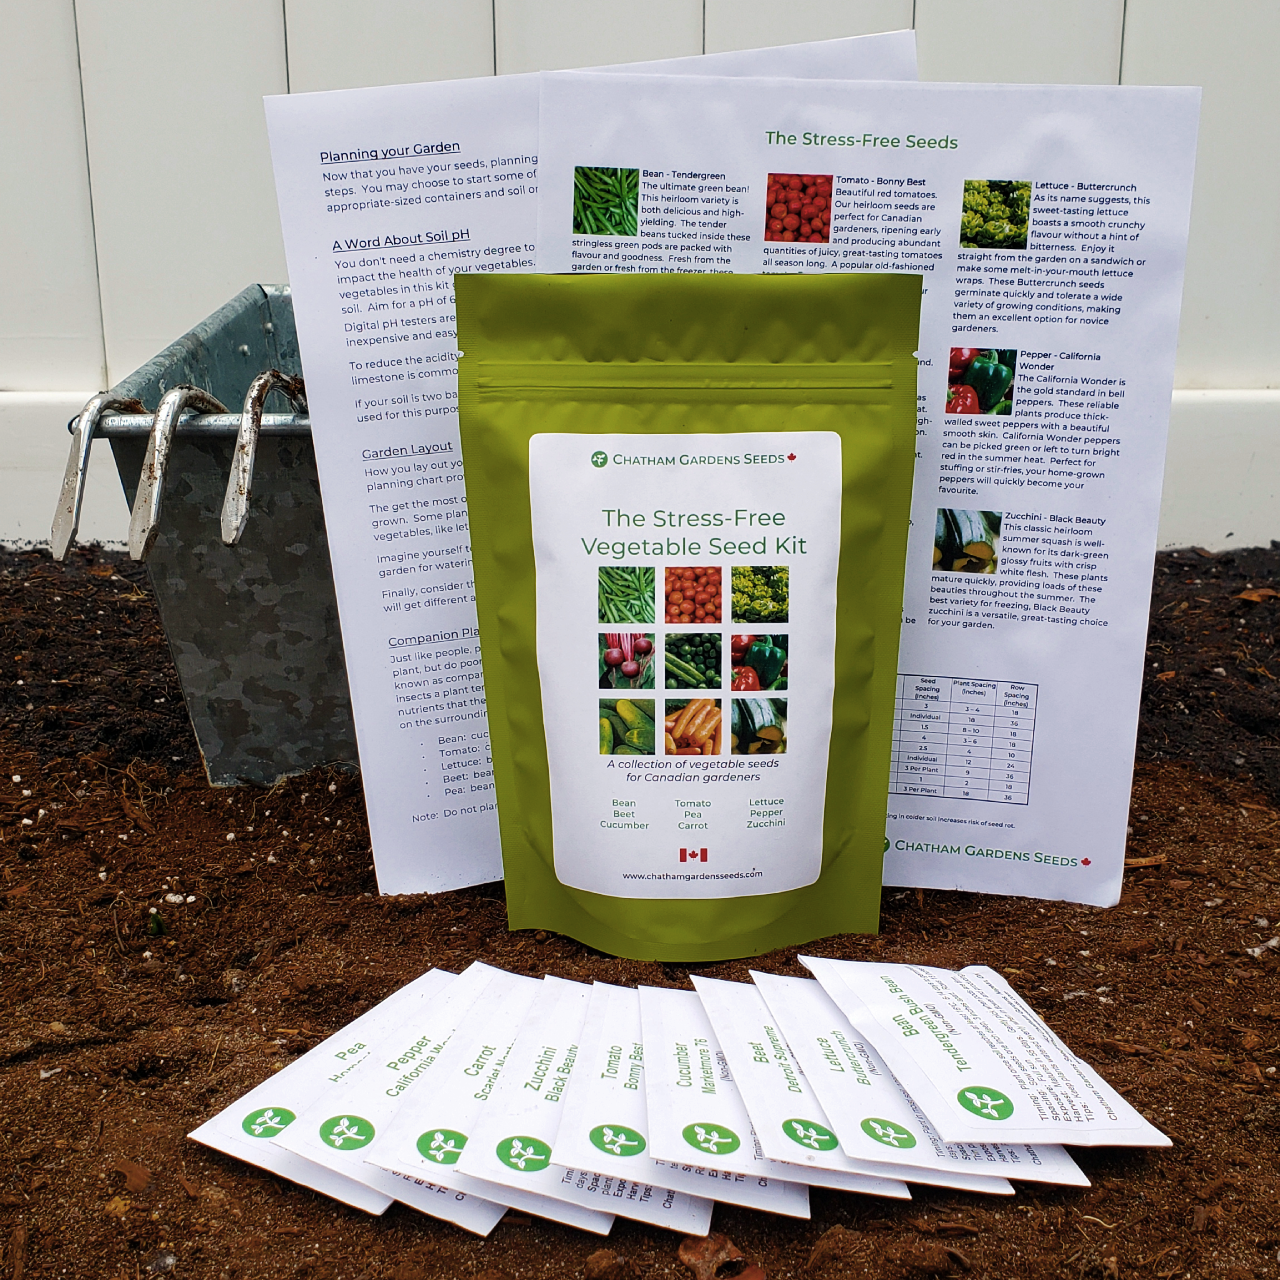 The Stress-Free Vegetable Seed Kit